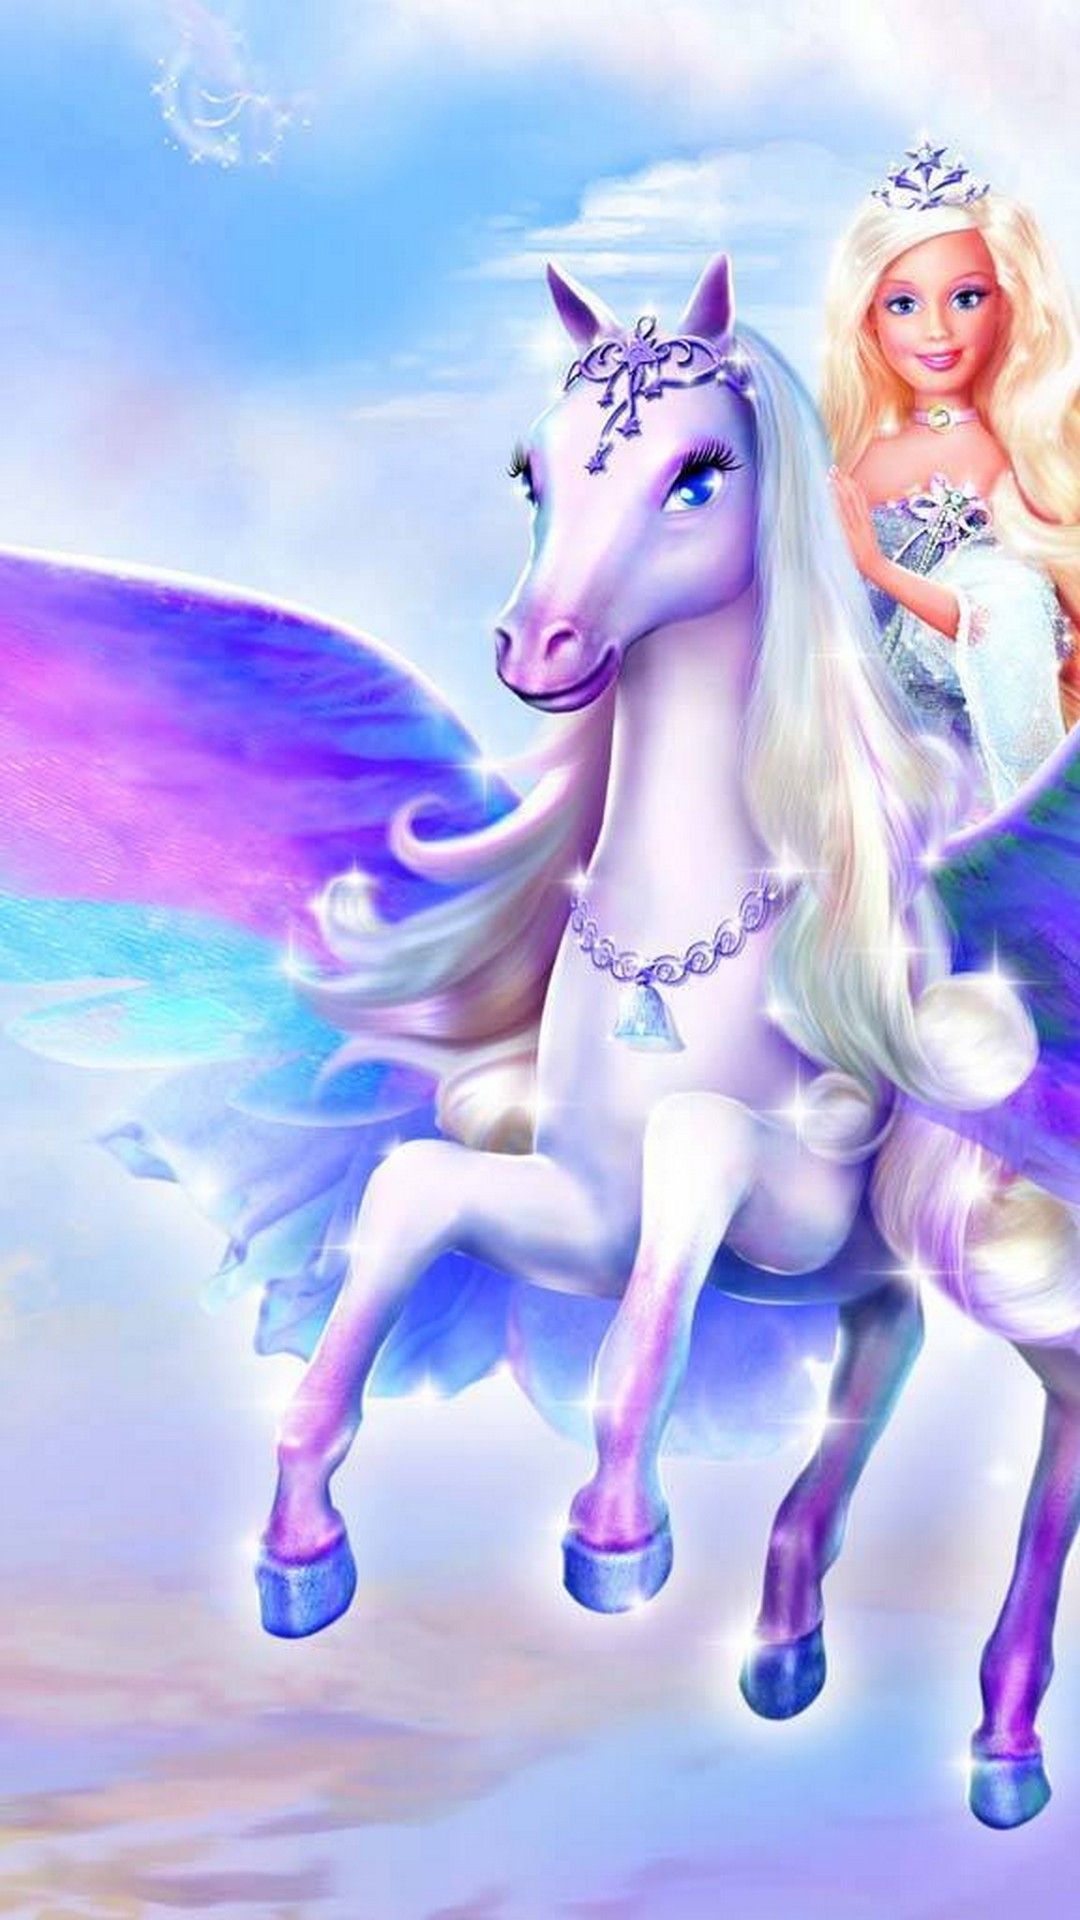 Cute Unicorn Android Wallpaper - 2021 Android Wallpapers